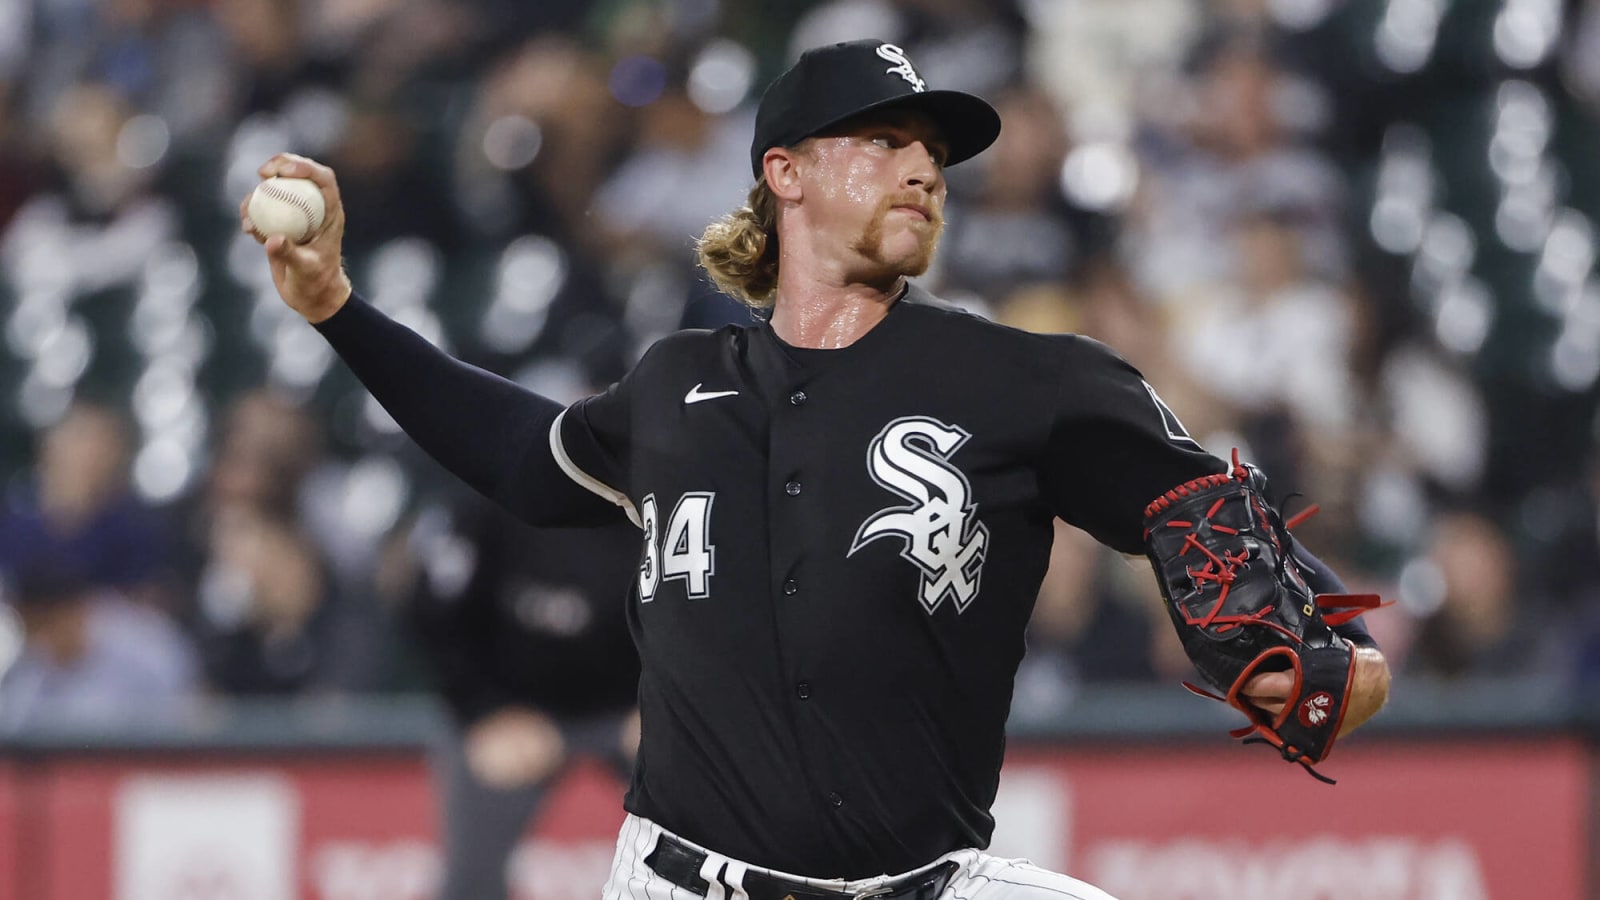 Michael Kopech uses his social media platform for good — and for